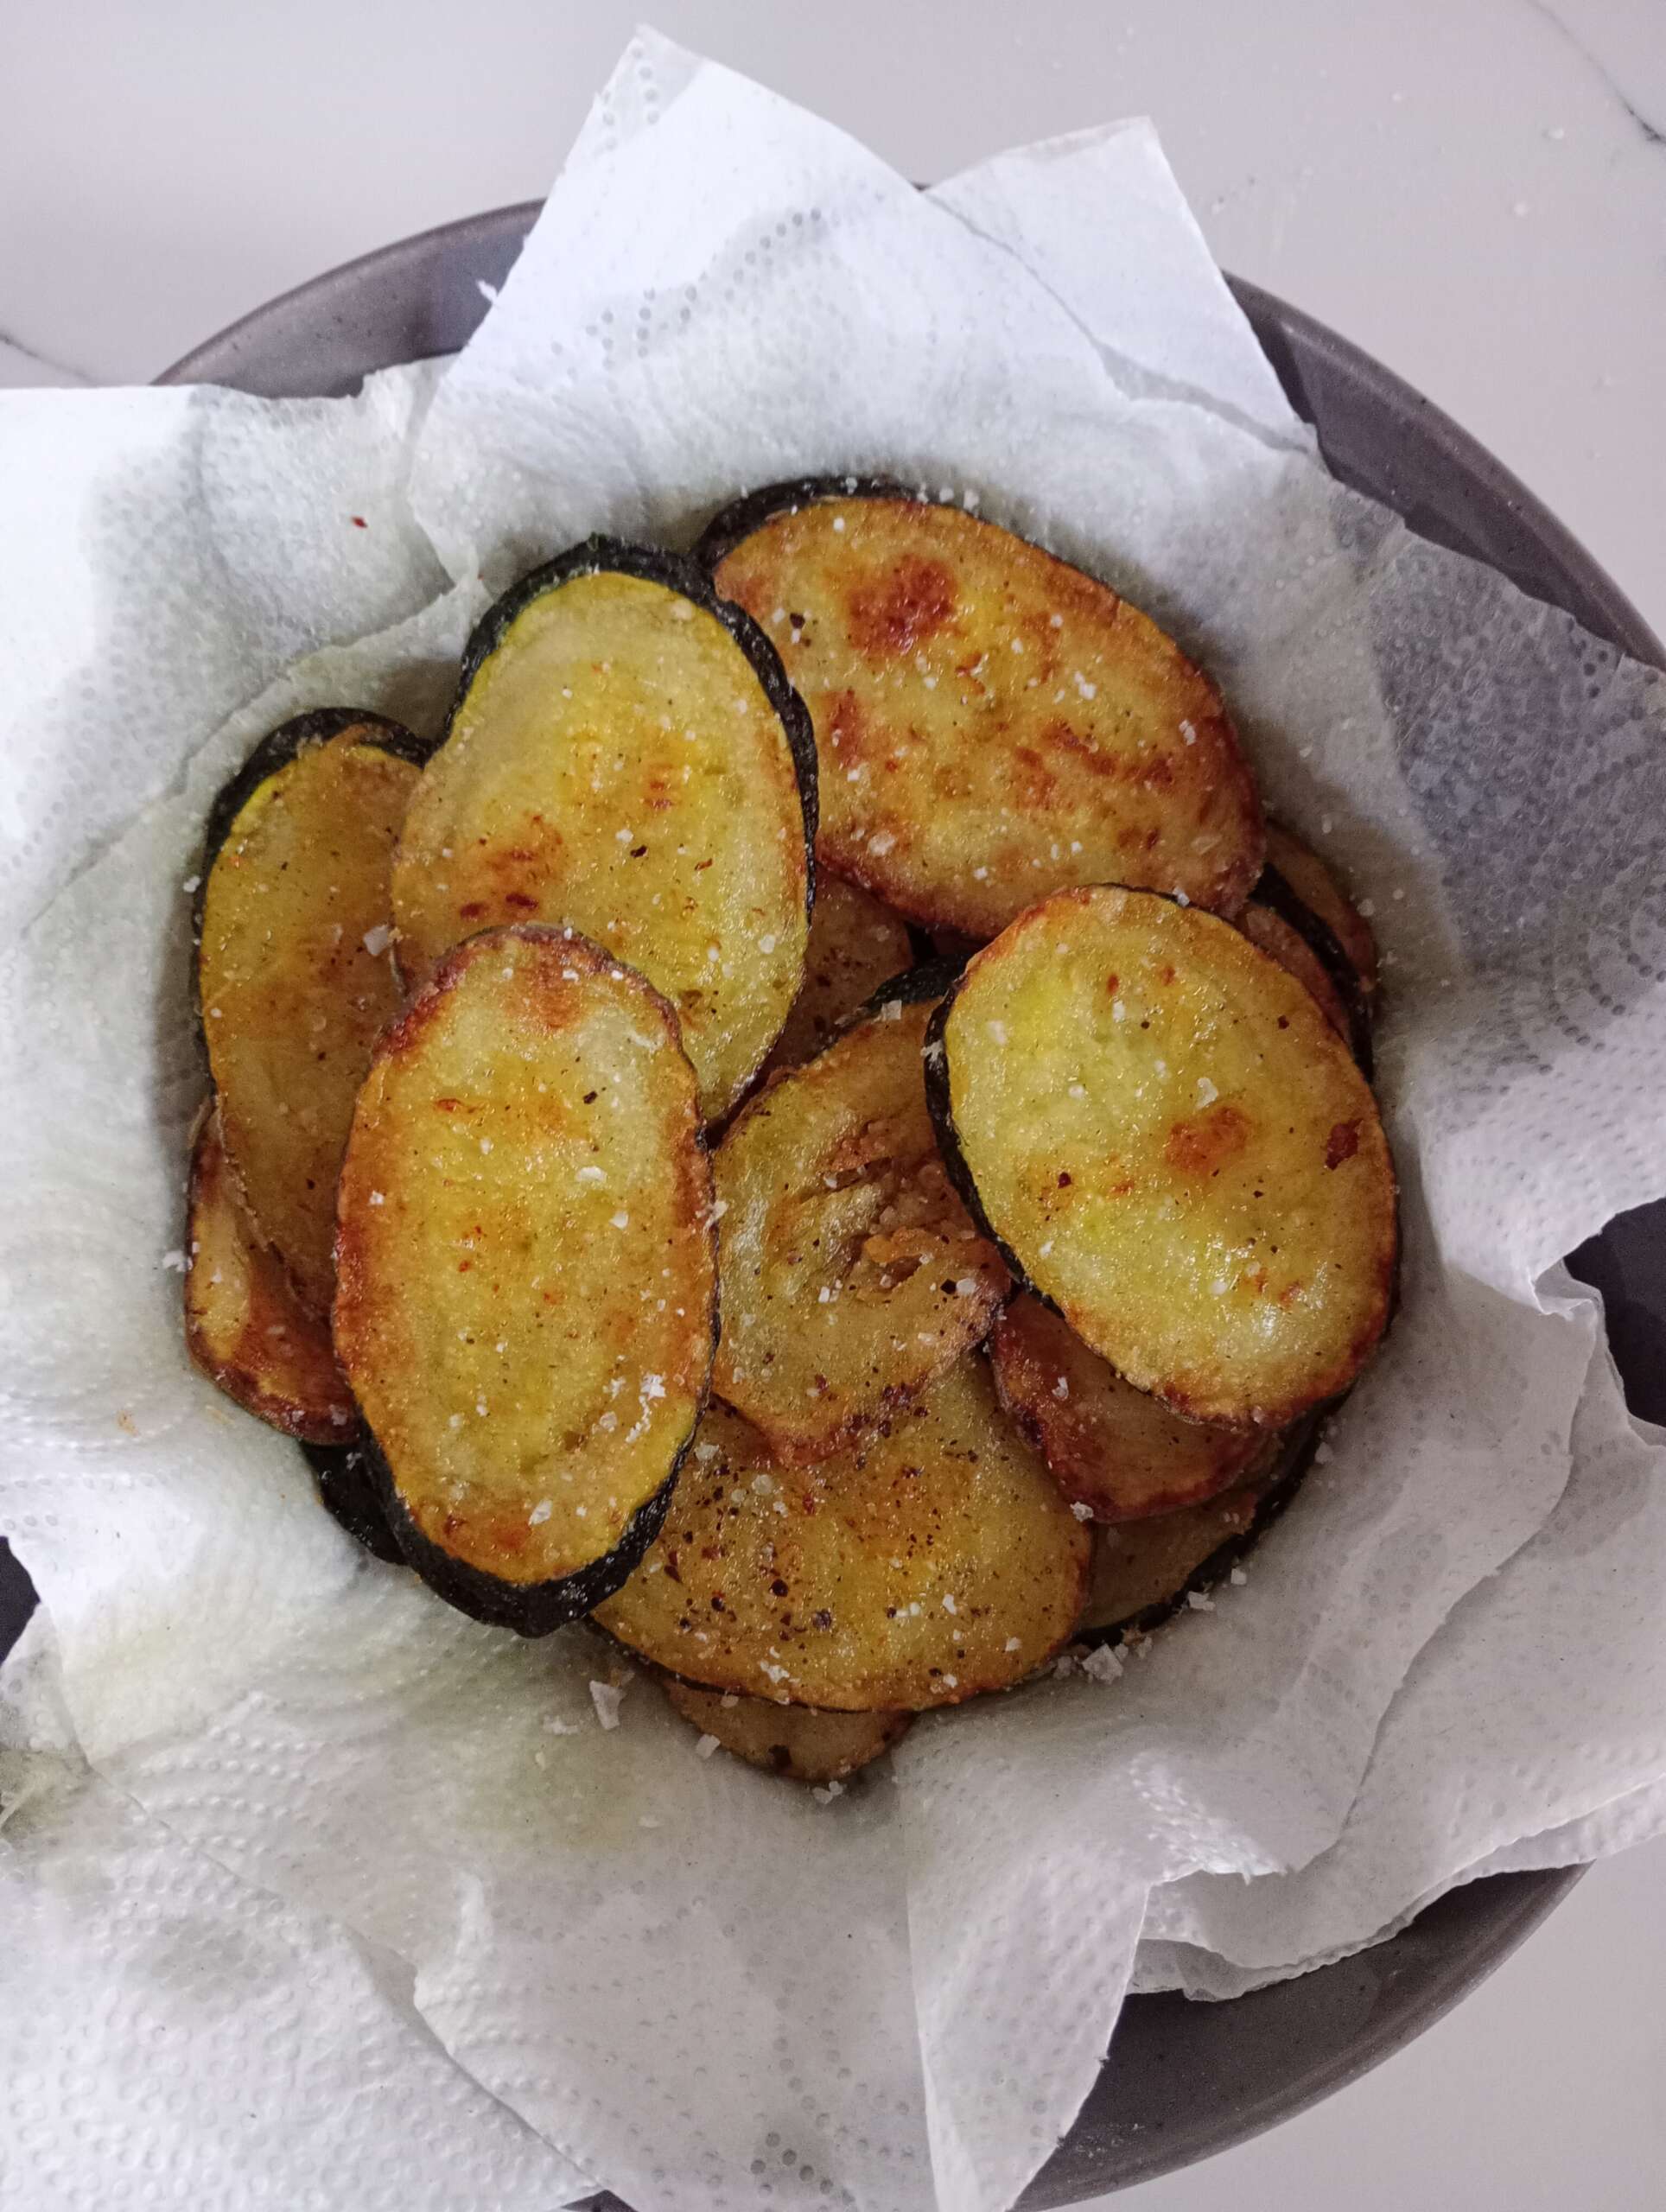 How to Use Up a Courgette Glut: Crispy Courgette Bites